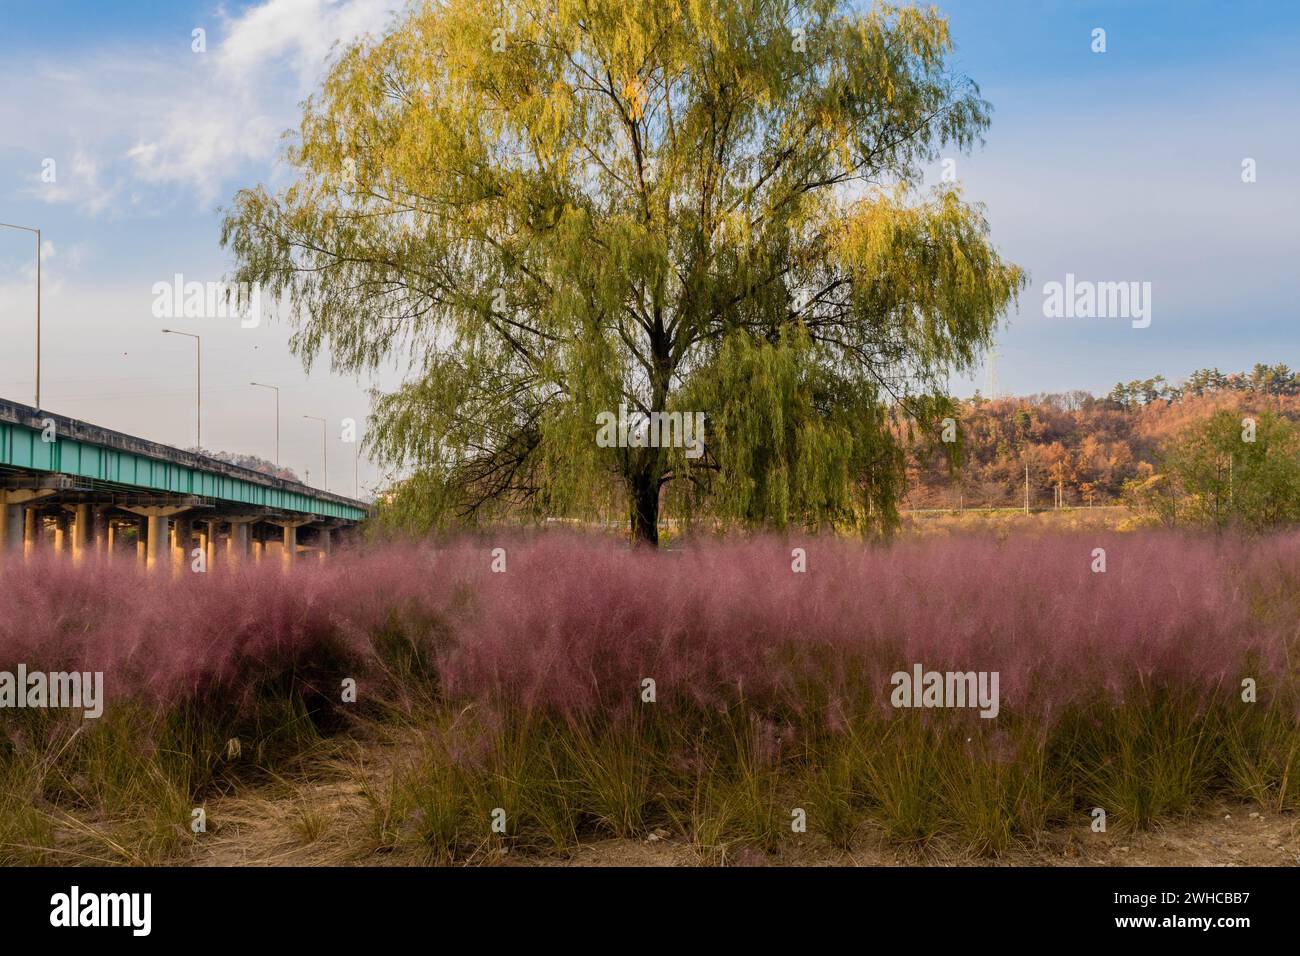 Field of pink muhly grass growing in front of large willow tree with bridge and beautiful blue sky in background in South Korea Stock Photo